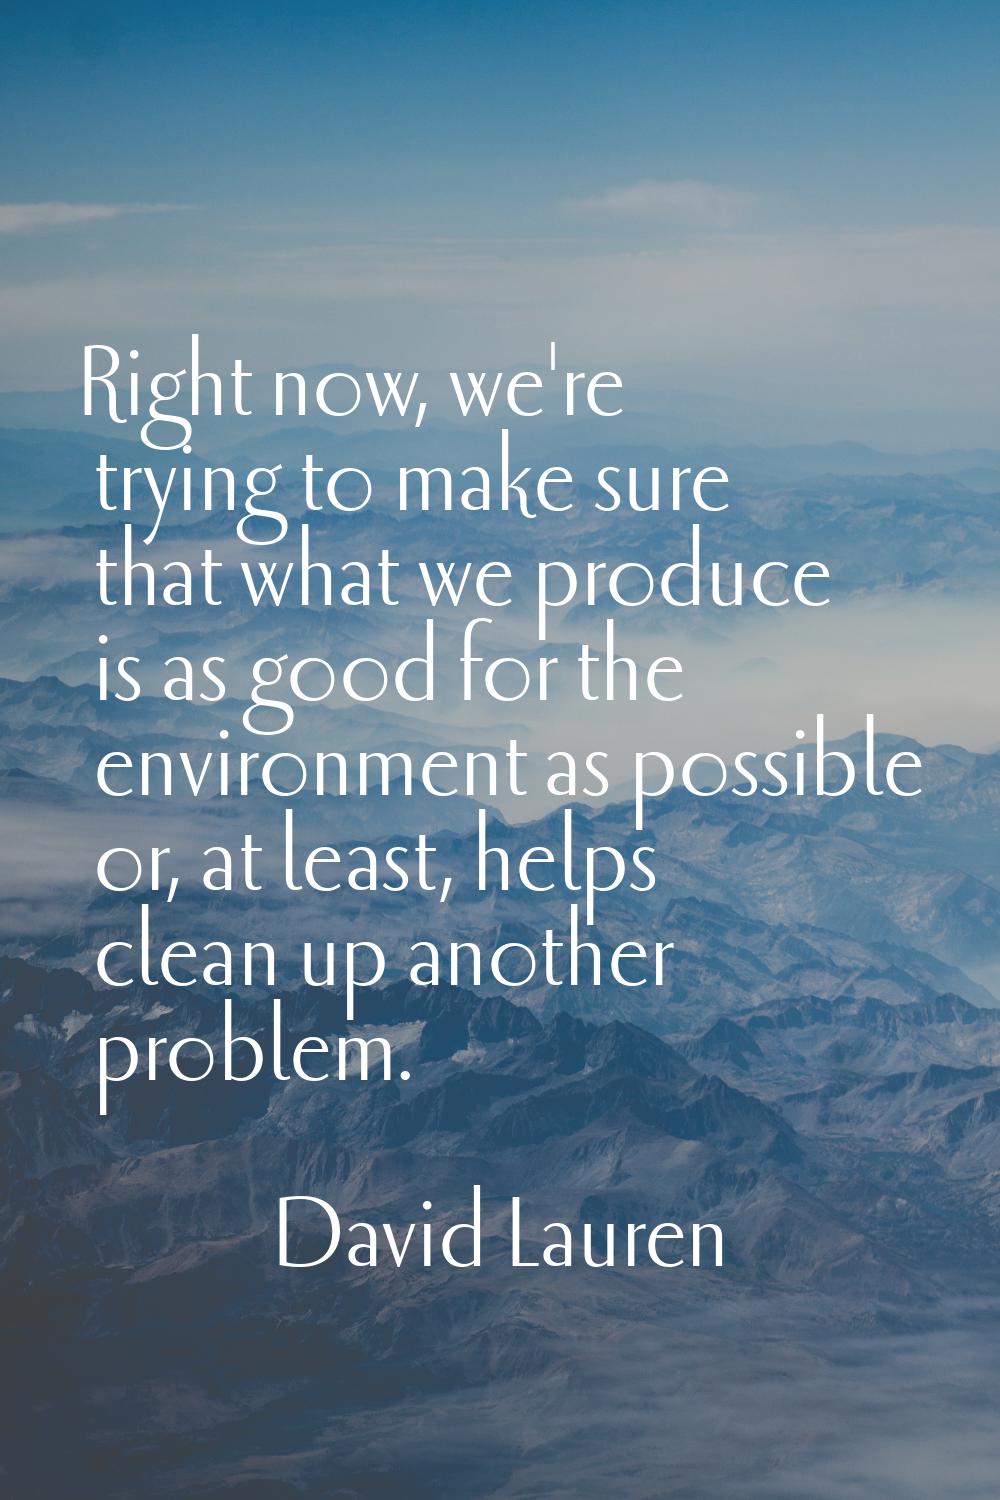 Right now, we're trying to make sure that what we produce is as good for the environment as possibl